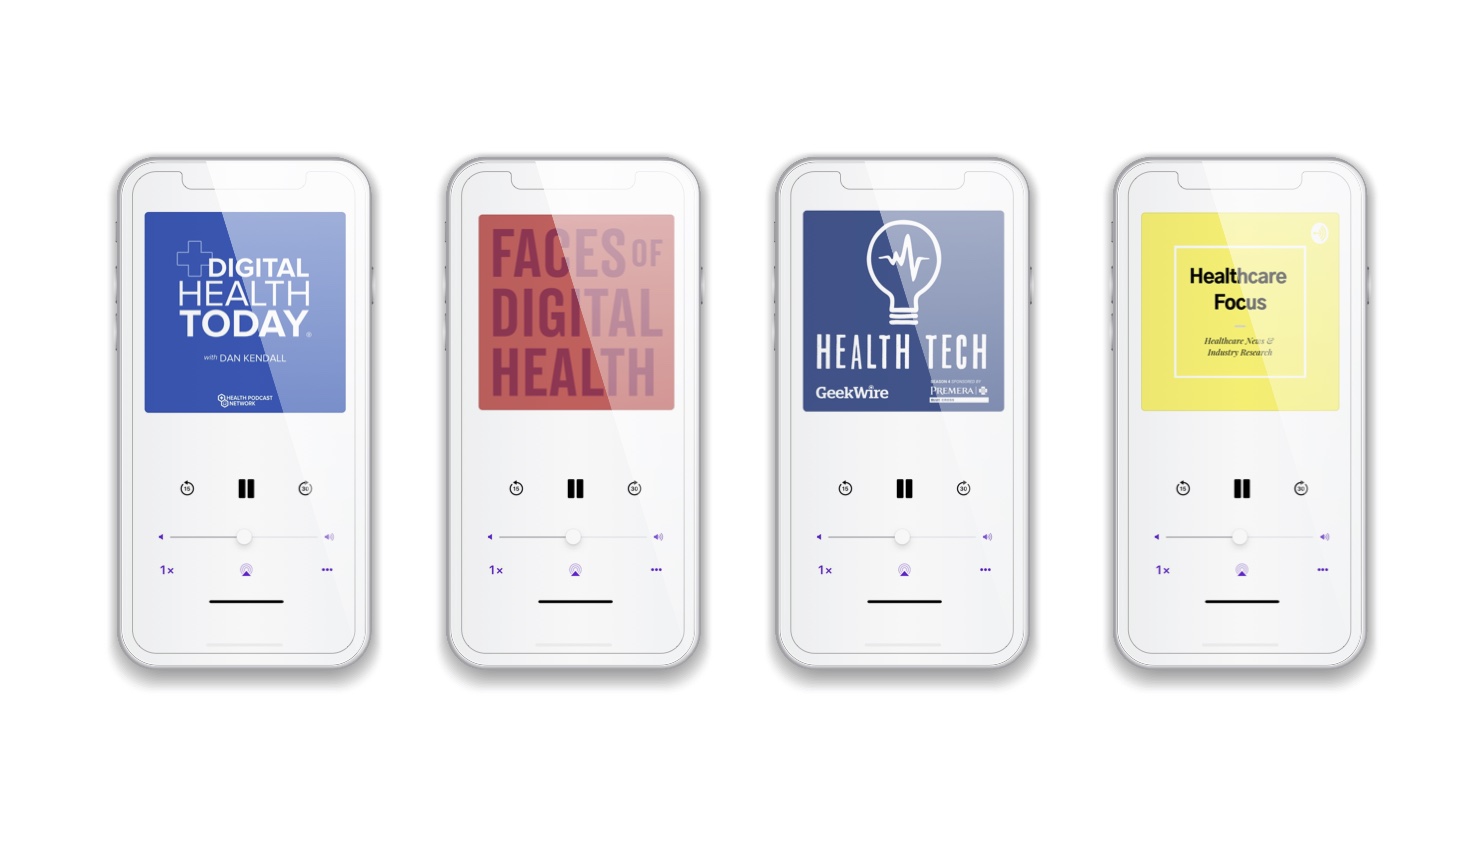 Healthcare podcasts faces of digital health geekwire focus